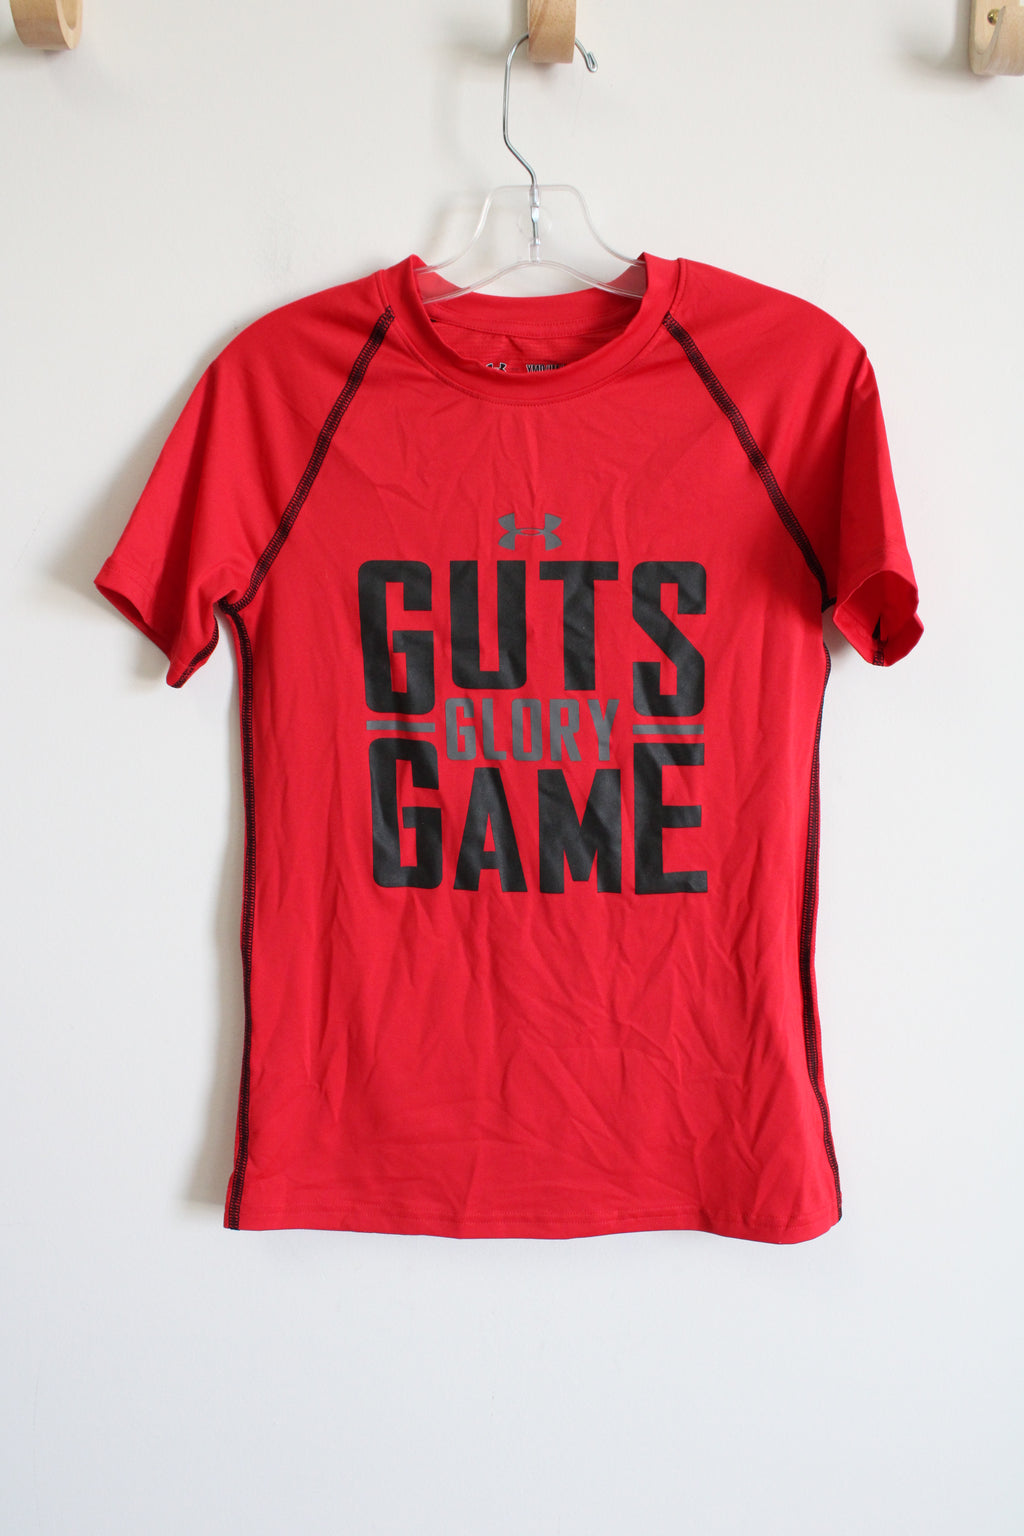 Under Armour Fitted Guts Glory Game Shirt | Youth M (10/12)